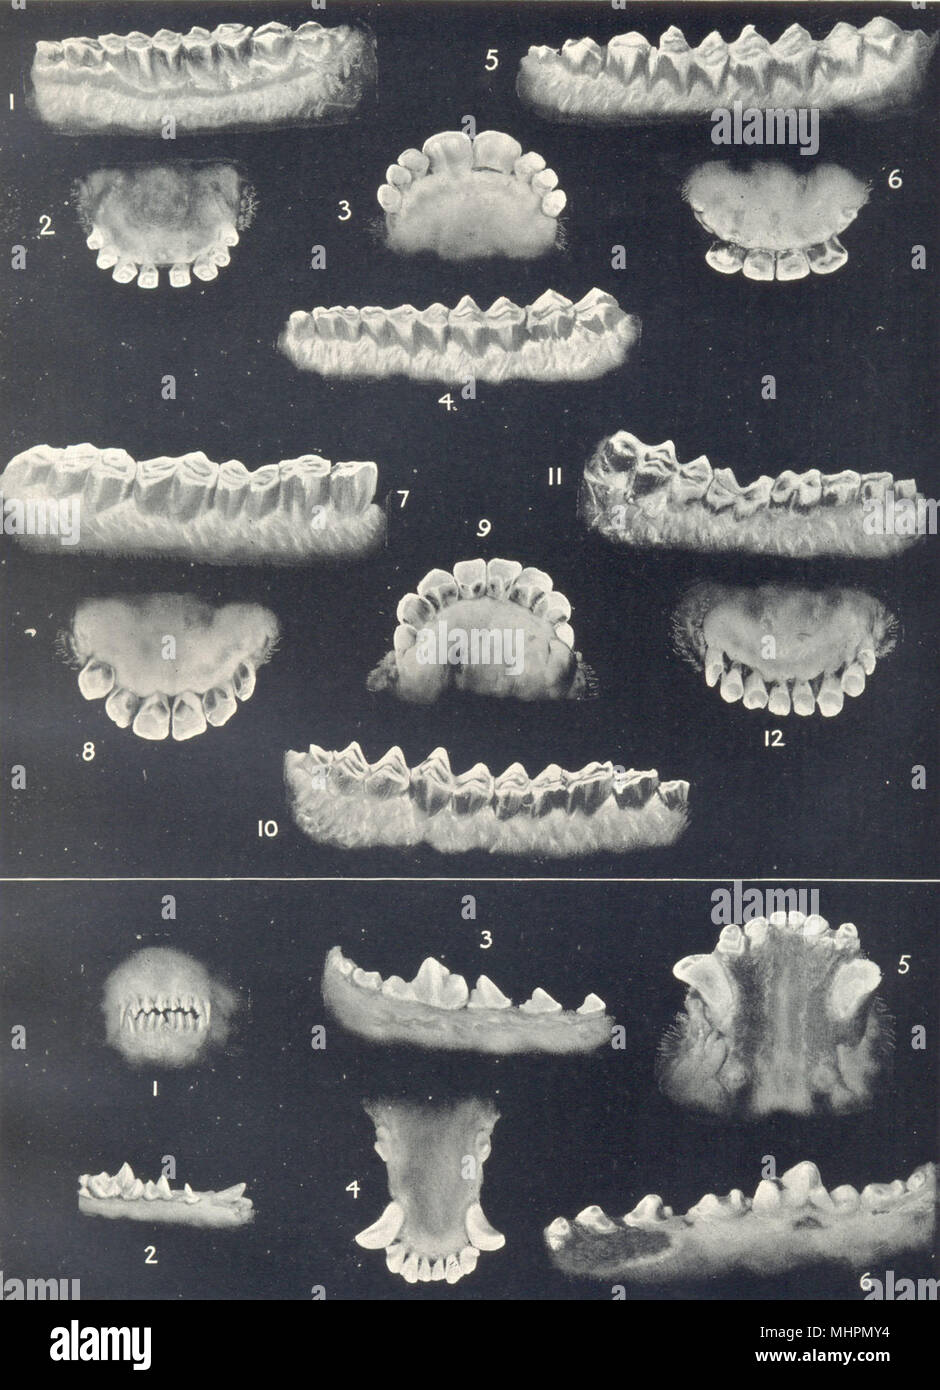 AGE OF SHEEP & DOGS. Dentition. Molars and incisors at various ages 1912 print Stock Photo